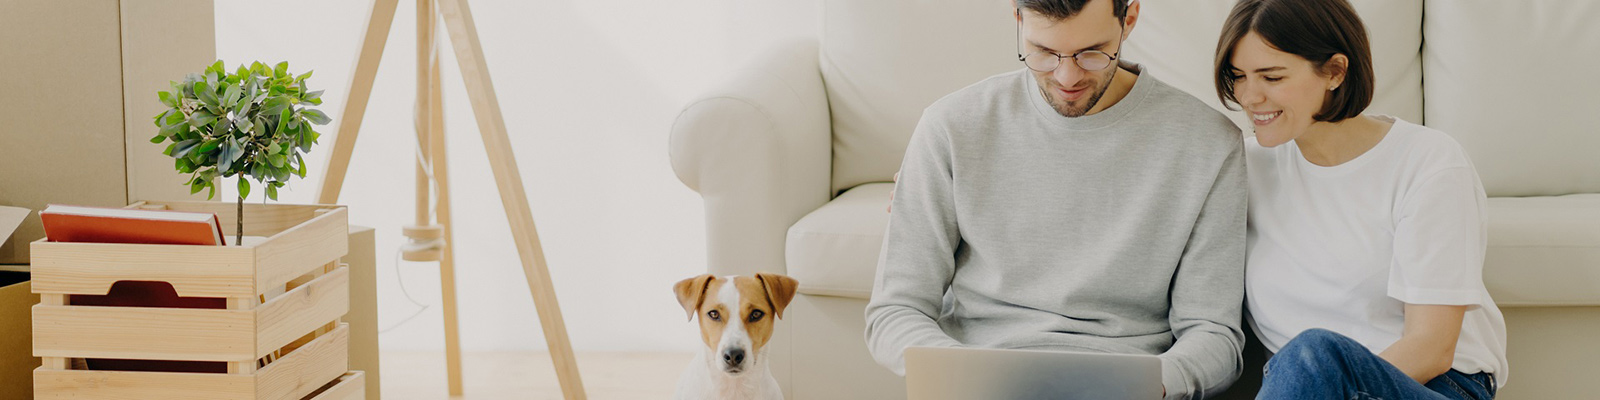 man and woman with dog viewing laptop